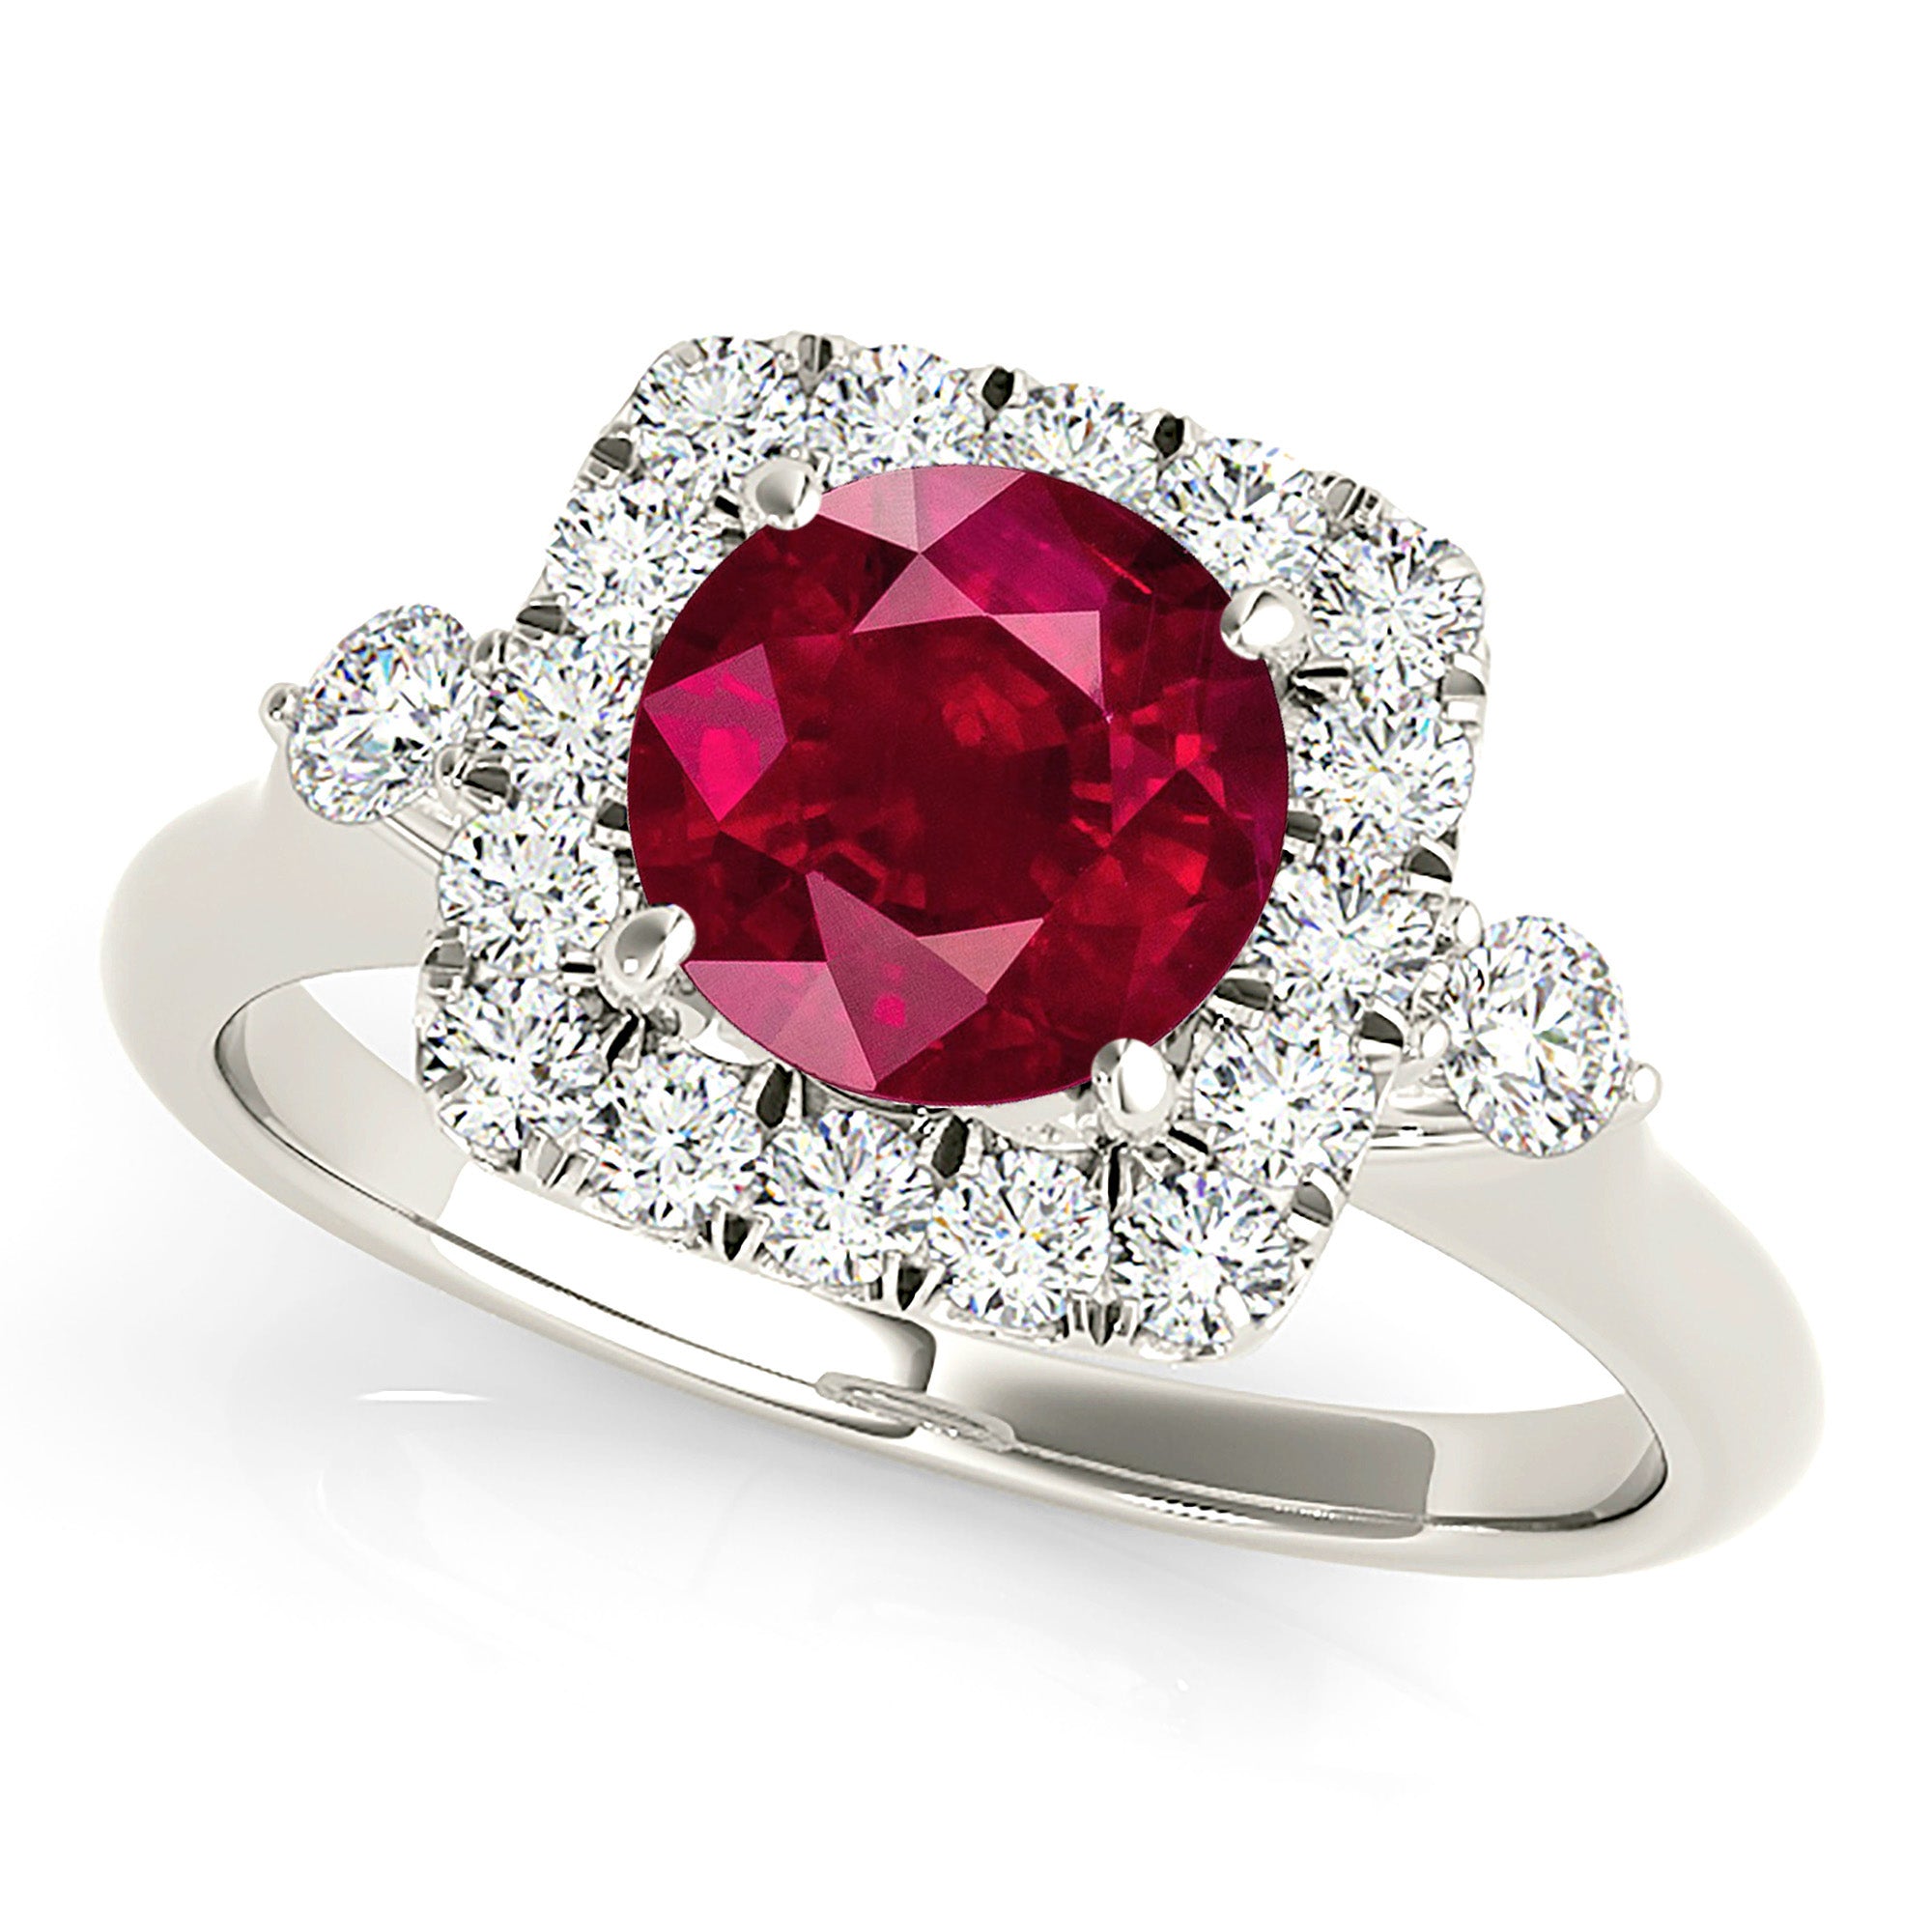 2.35 ct. Genuine Ruby Ring With 0.50 ctw. Diamond Halo And Accent Side Diamonds,Solid Gold Band-in 14K/18K White, Yellow, Rose Gold and Platinum - Christmas Jewelry Gift -VIRABYANI